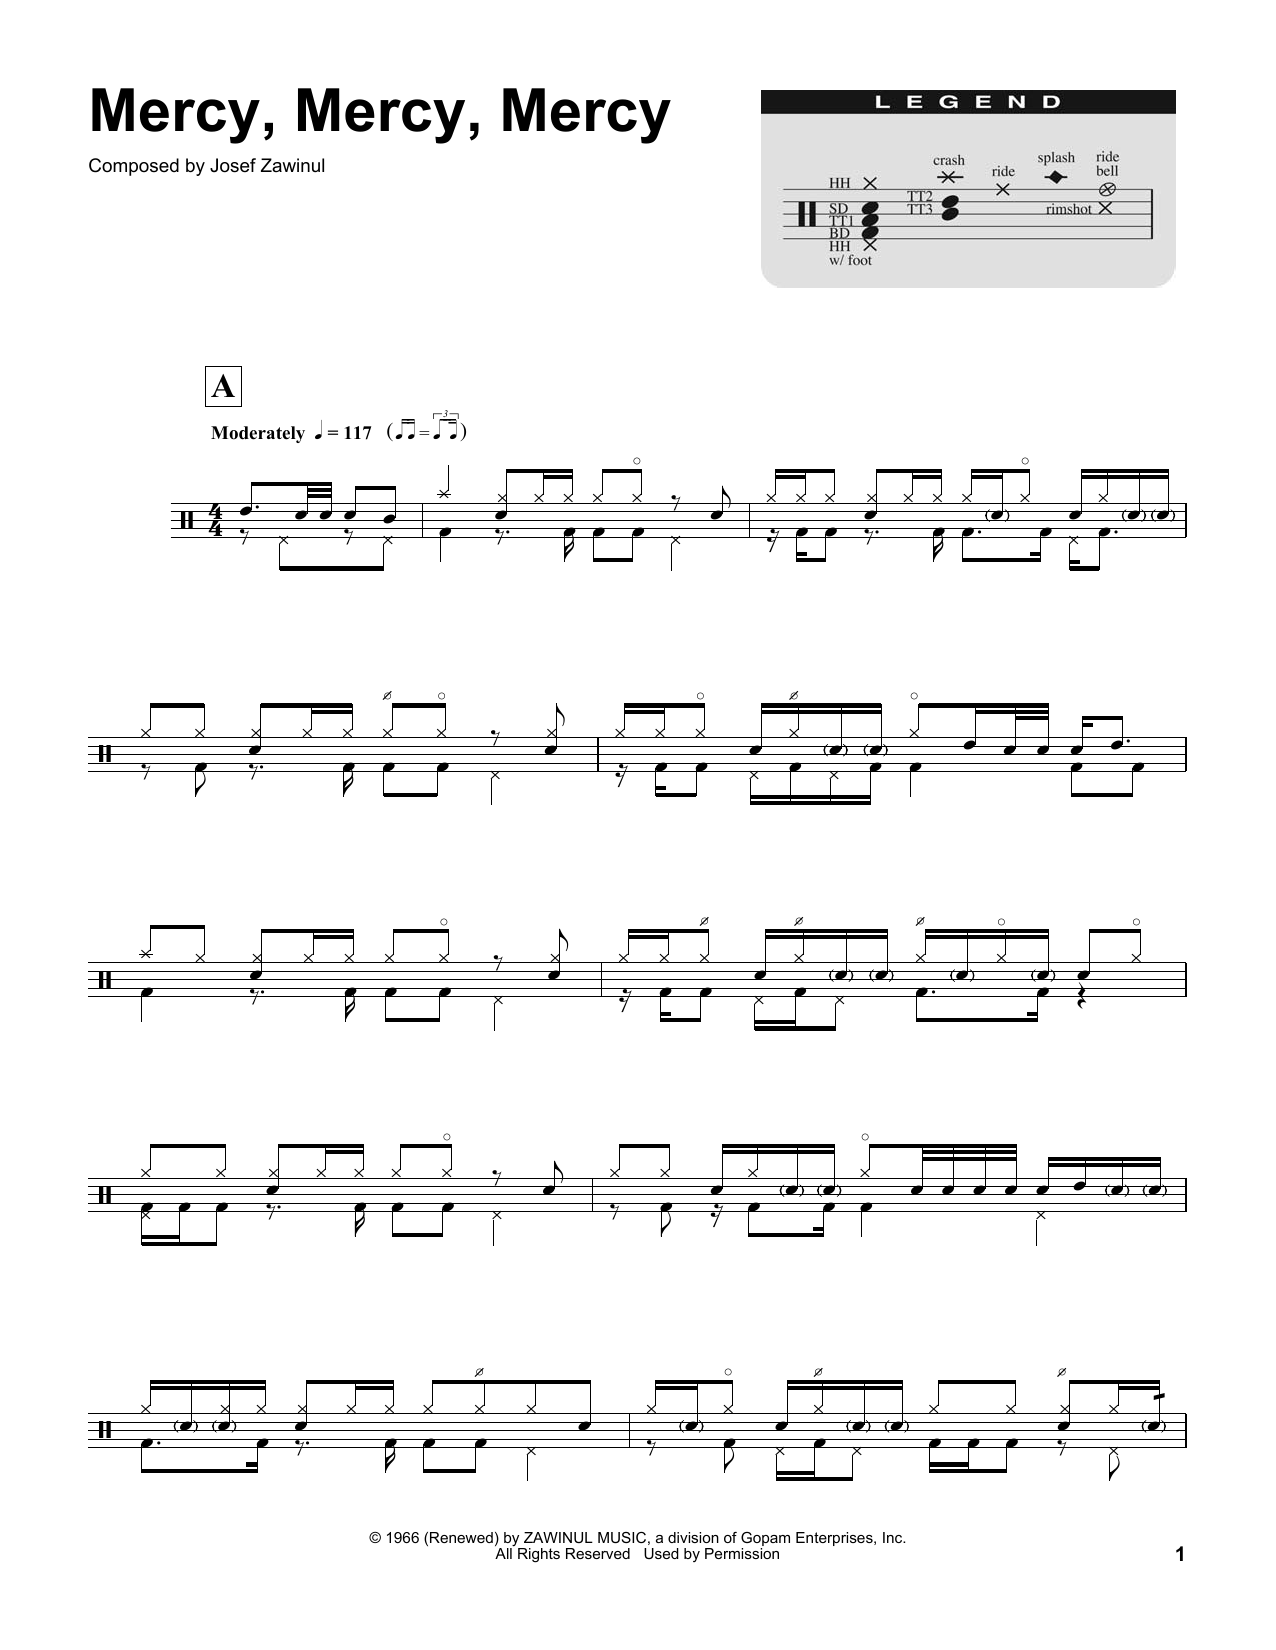 The Buckinghams "Mercy, Mercy, Mercy" Sheet Music Notes | Download